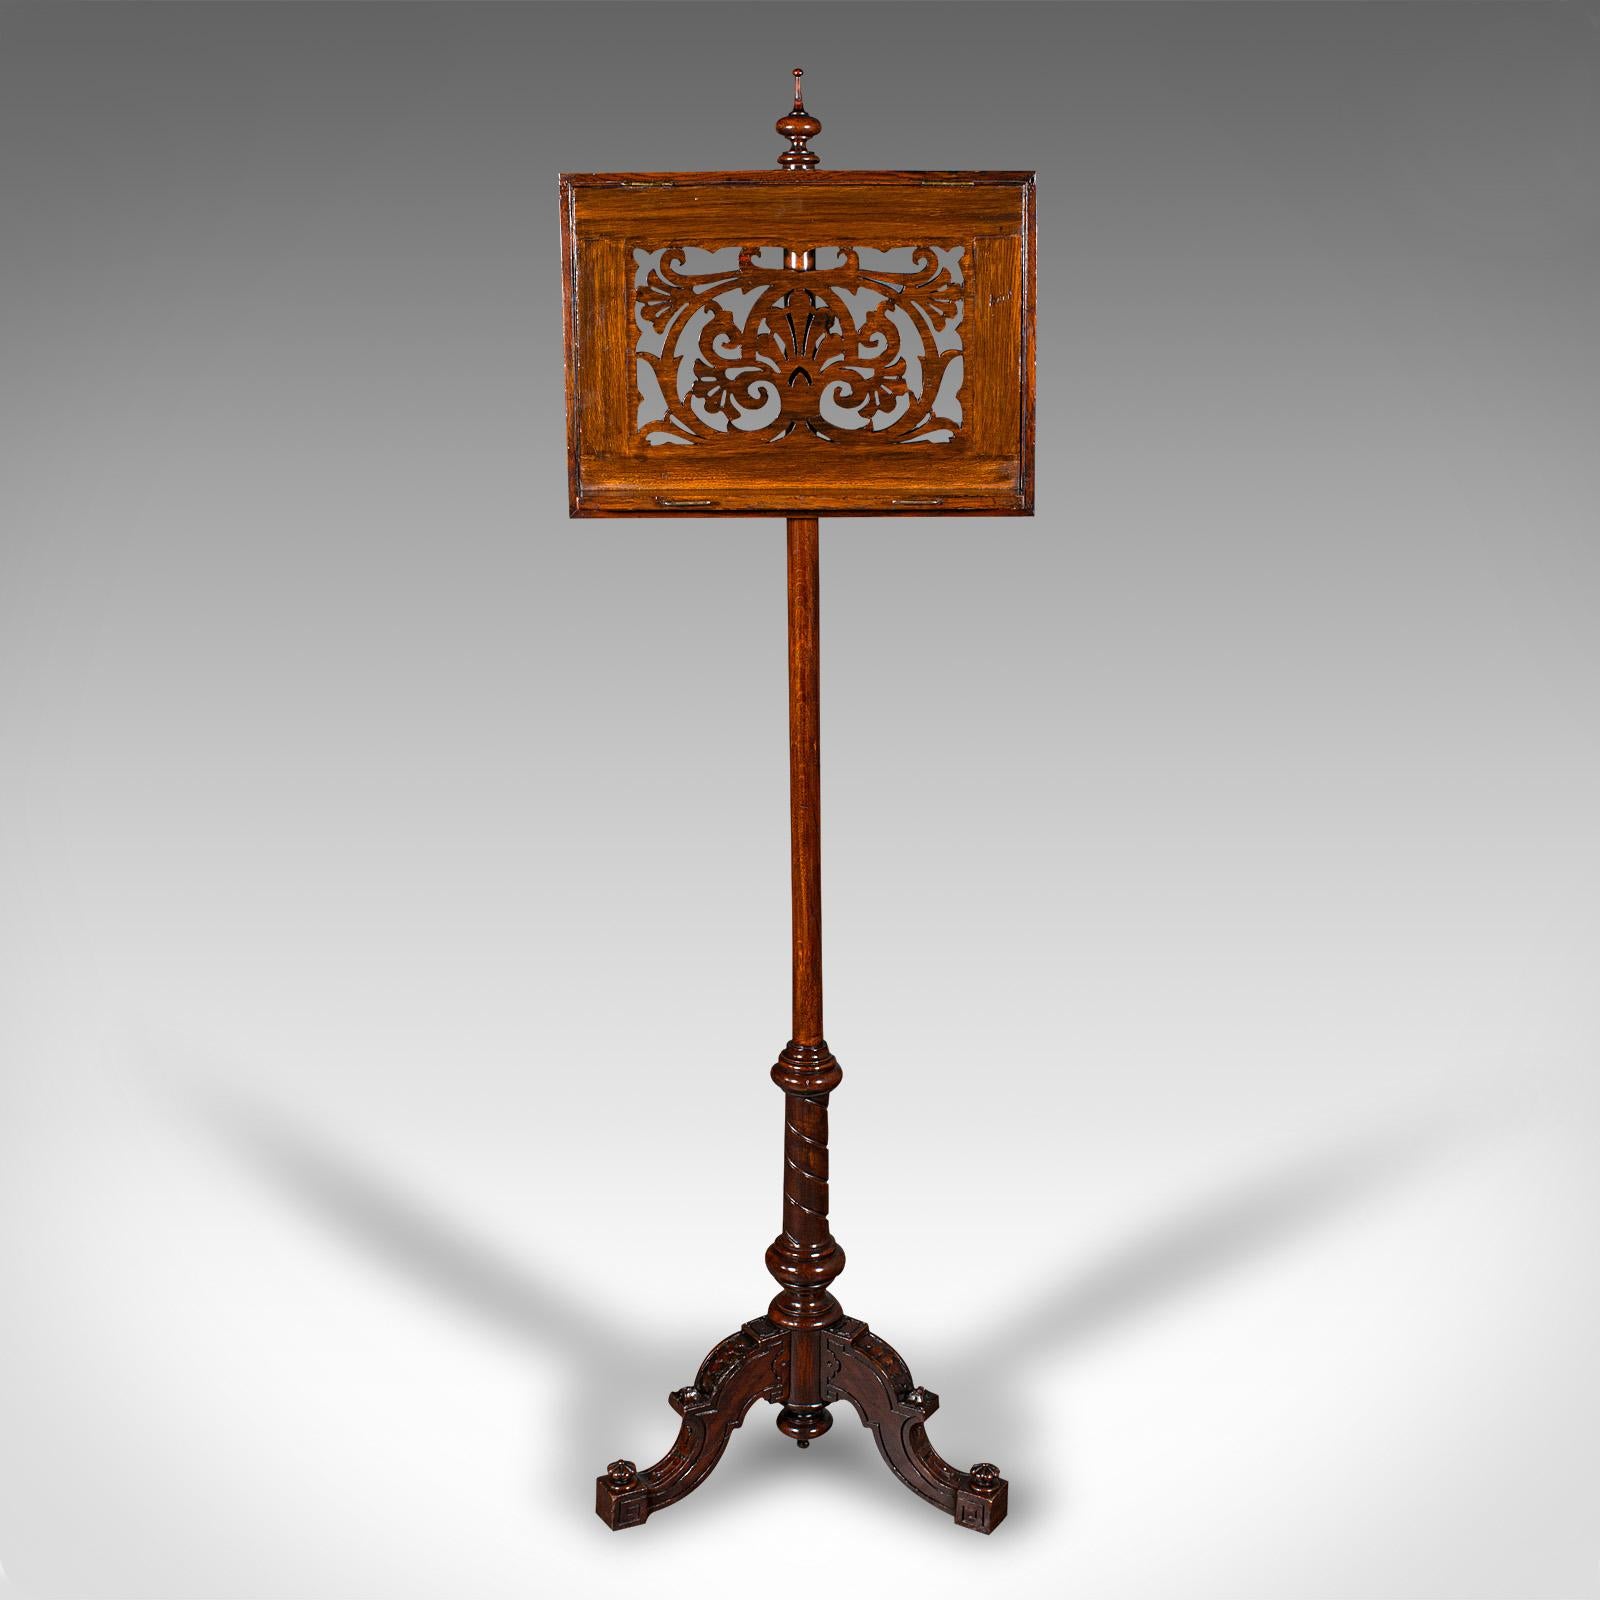 British Tall Antique Music Stand, English, Oak, Adjustable Recital Rest, Victorian, 1880 For Sale